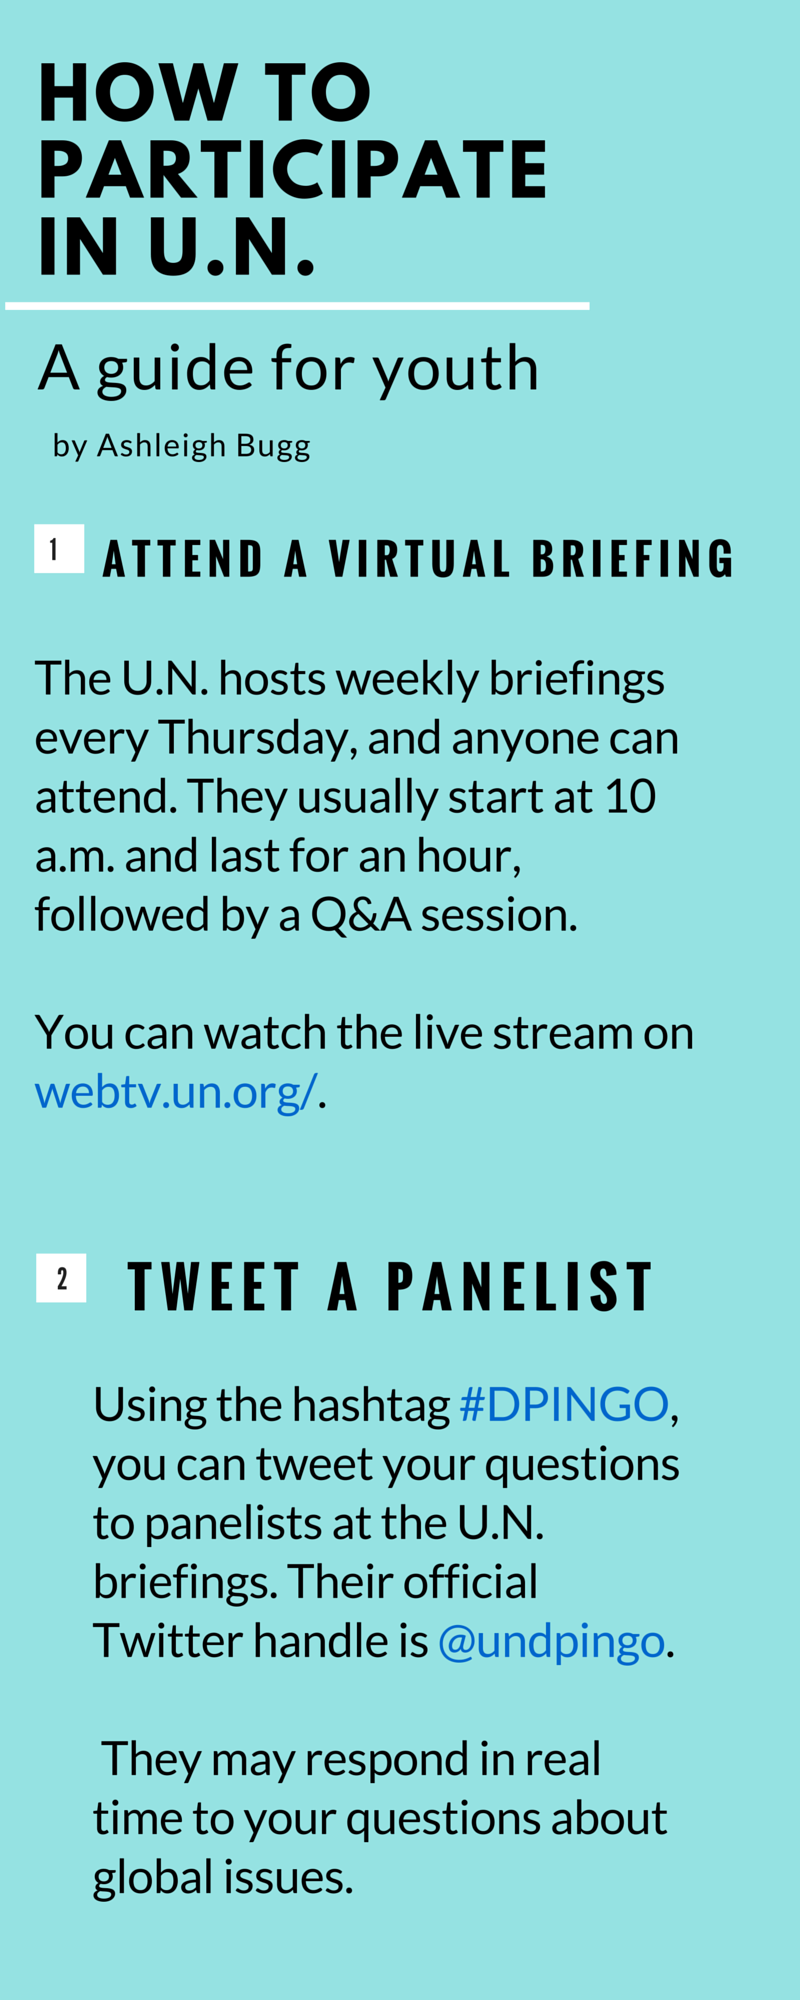 HOw to Participate in the U.N. (2).png